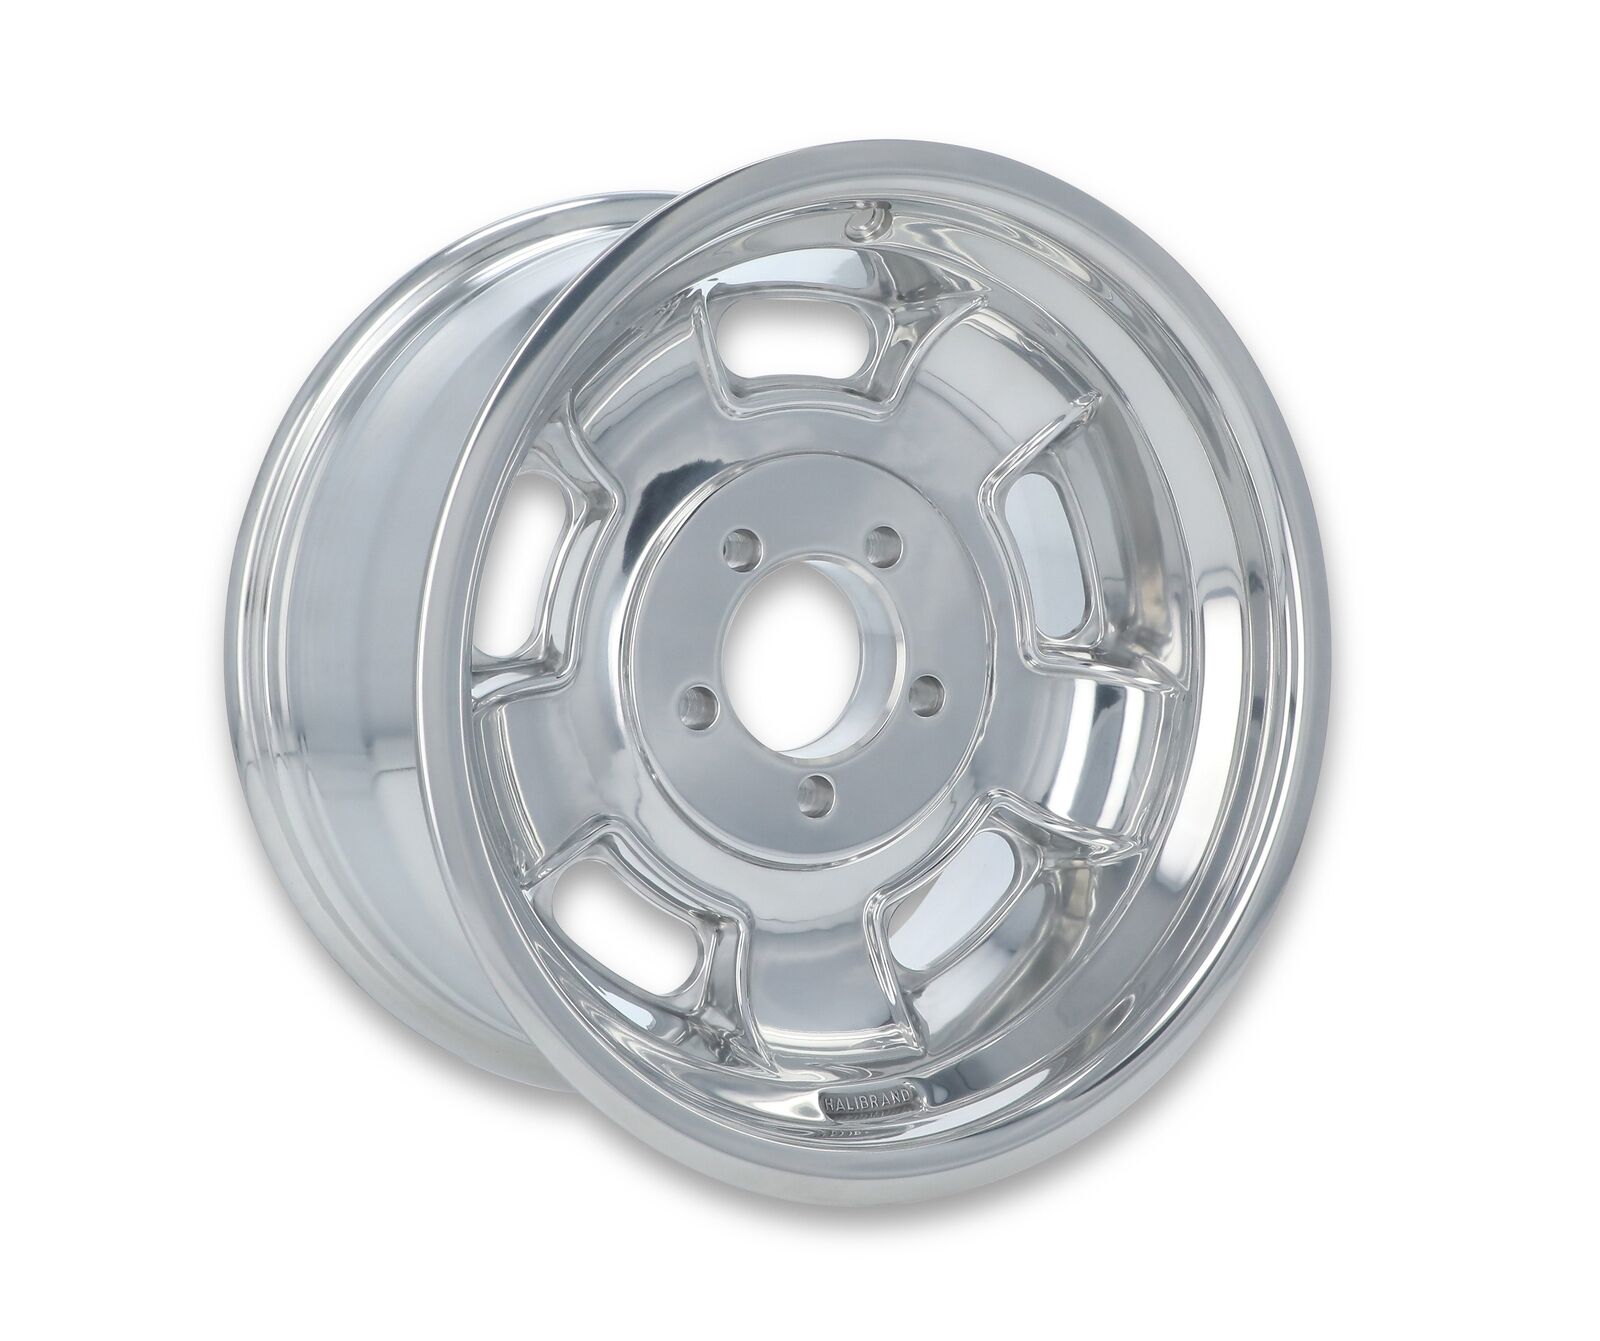 Halibrand Sprint Flow Formed Wheel 15x8 - 5x4.5 4.25 bs Polished No Clearcoat